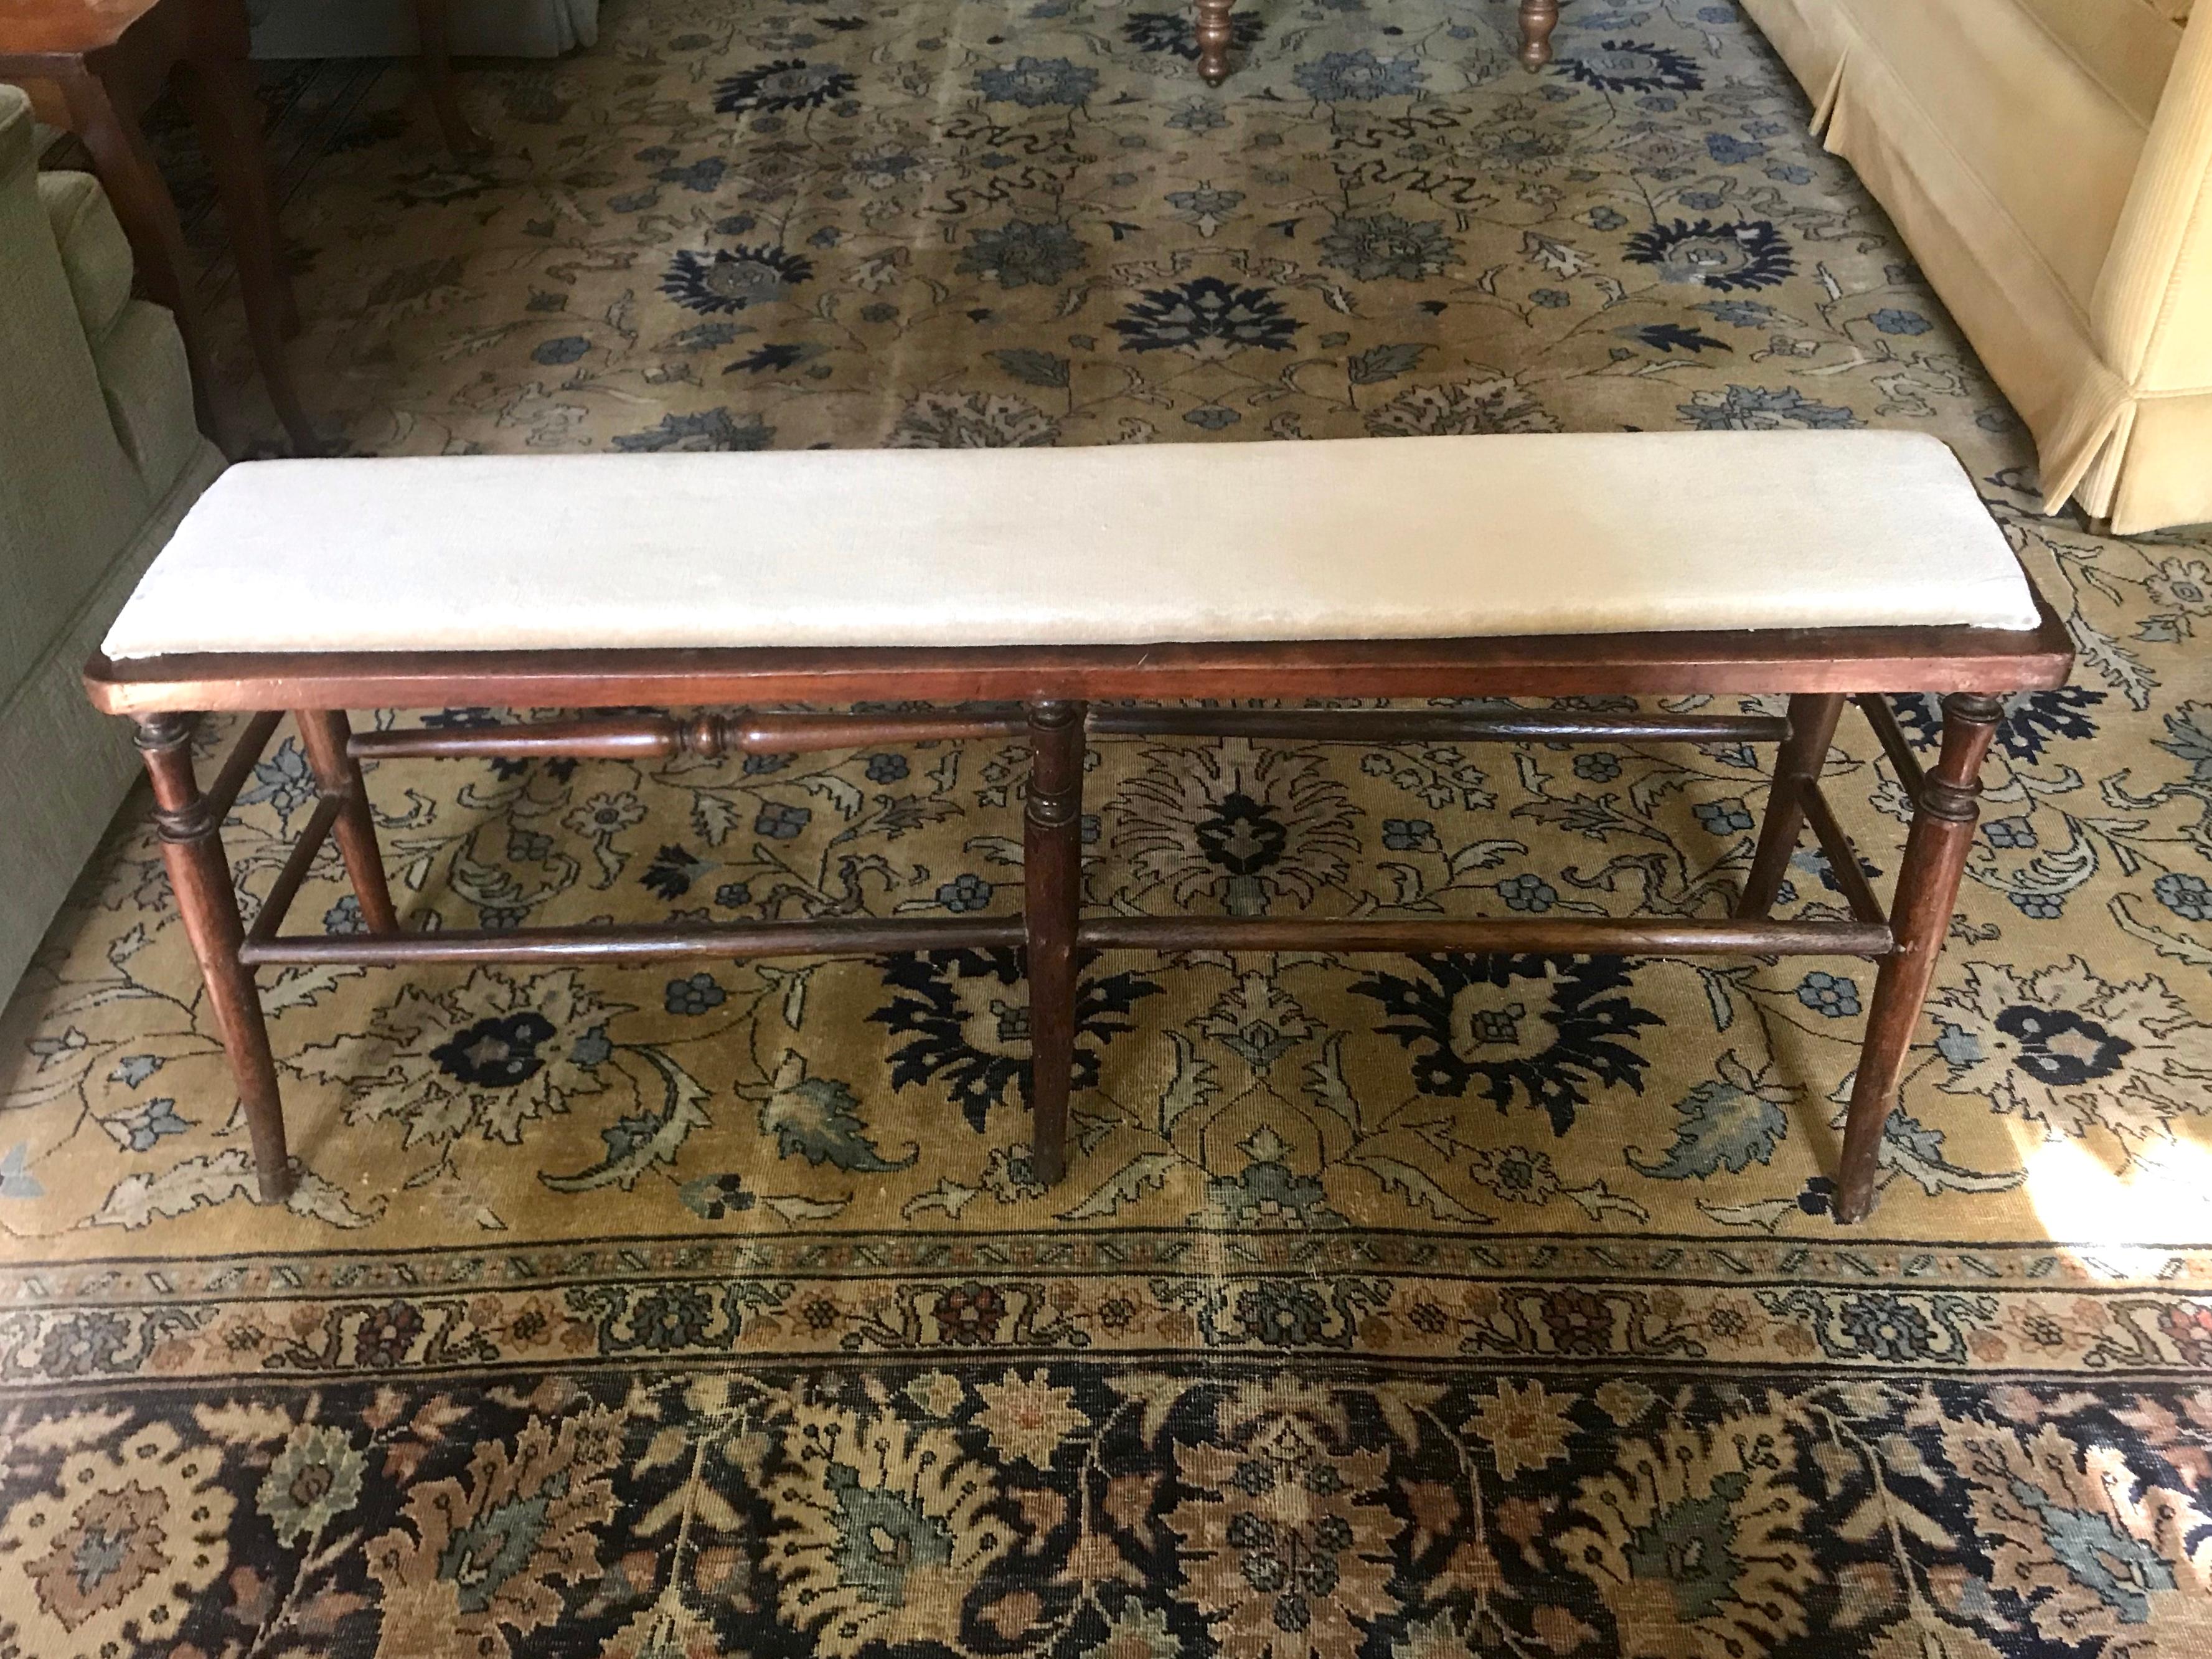 American hall bench. Rare narrow turned wood bench for hall or foot of bed with linen velvet cushion on six slightly outsplayed legs; maintaining one original turned stretcher. United States Mid-19th century. 
Dimensions: 44.5” W x 11.5” D x 18” H.